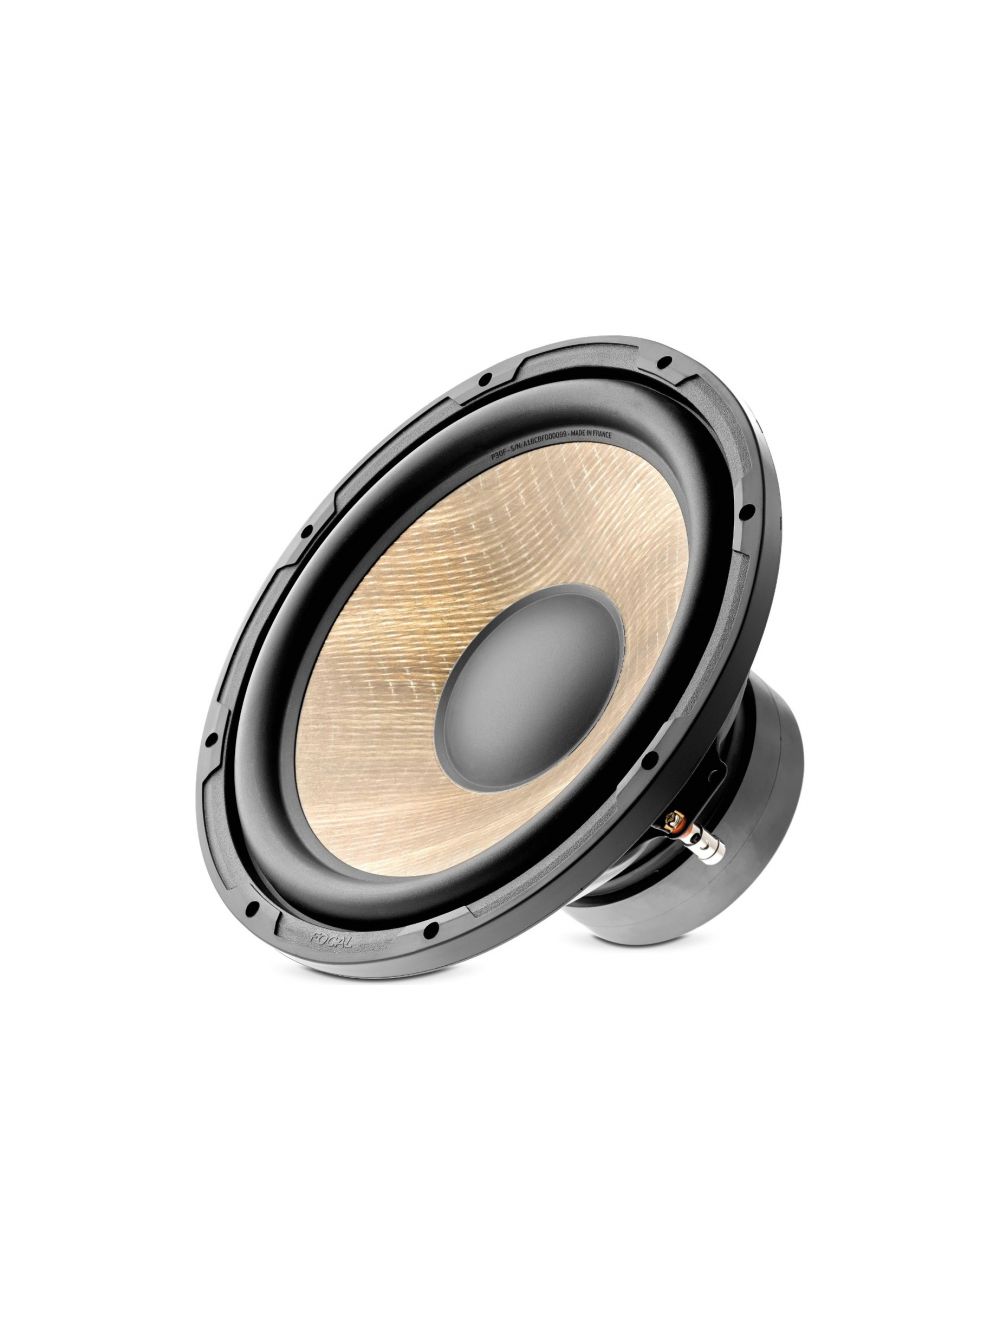 Focal SUB P 30F 12 Flax cone subwoofer, RMS: 400W - MAX: 800W